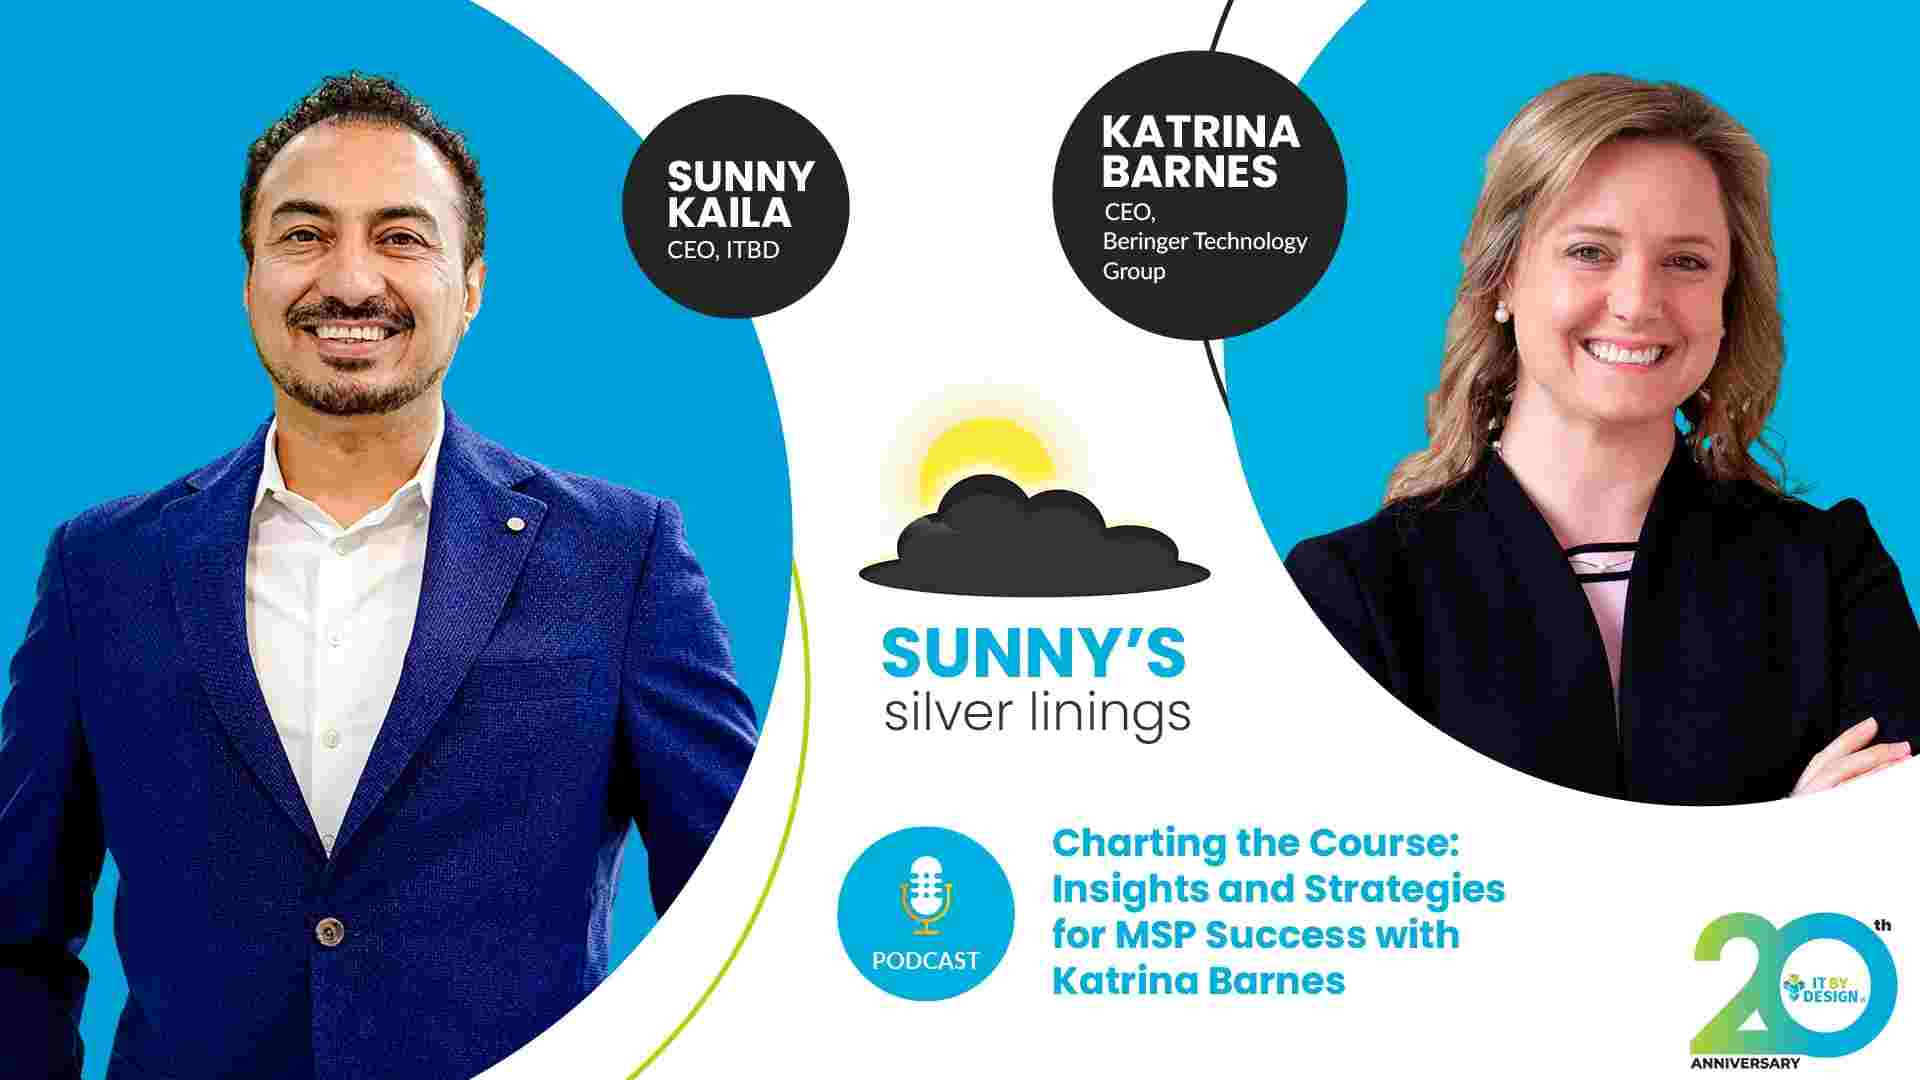 Charting the Course - Insights and Strategies for MSP Success with Katrina Barnes